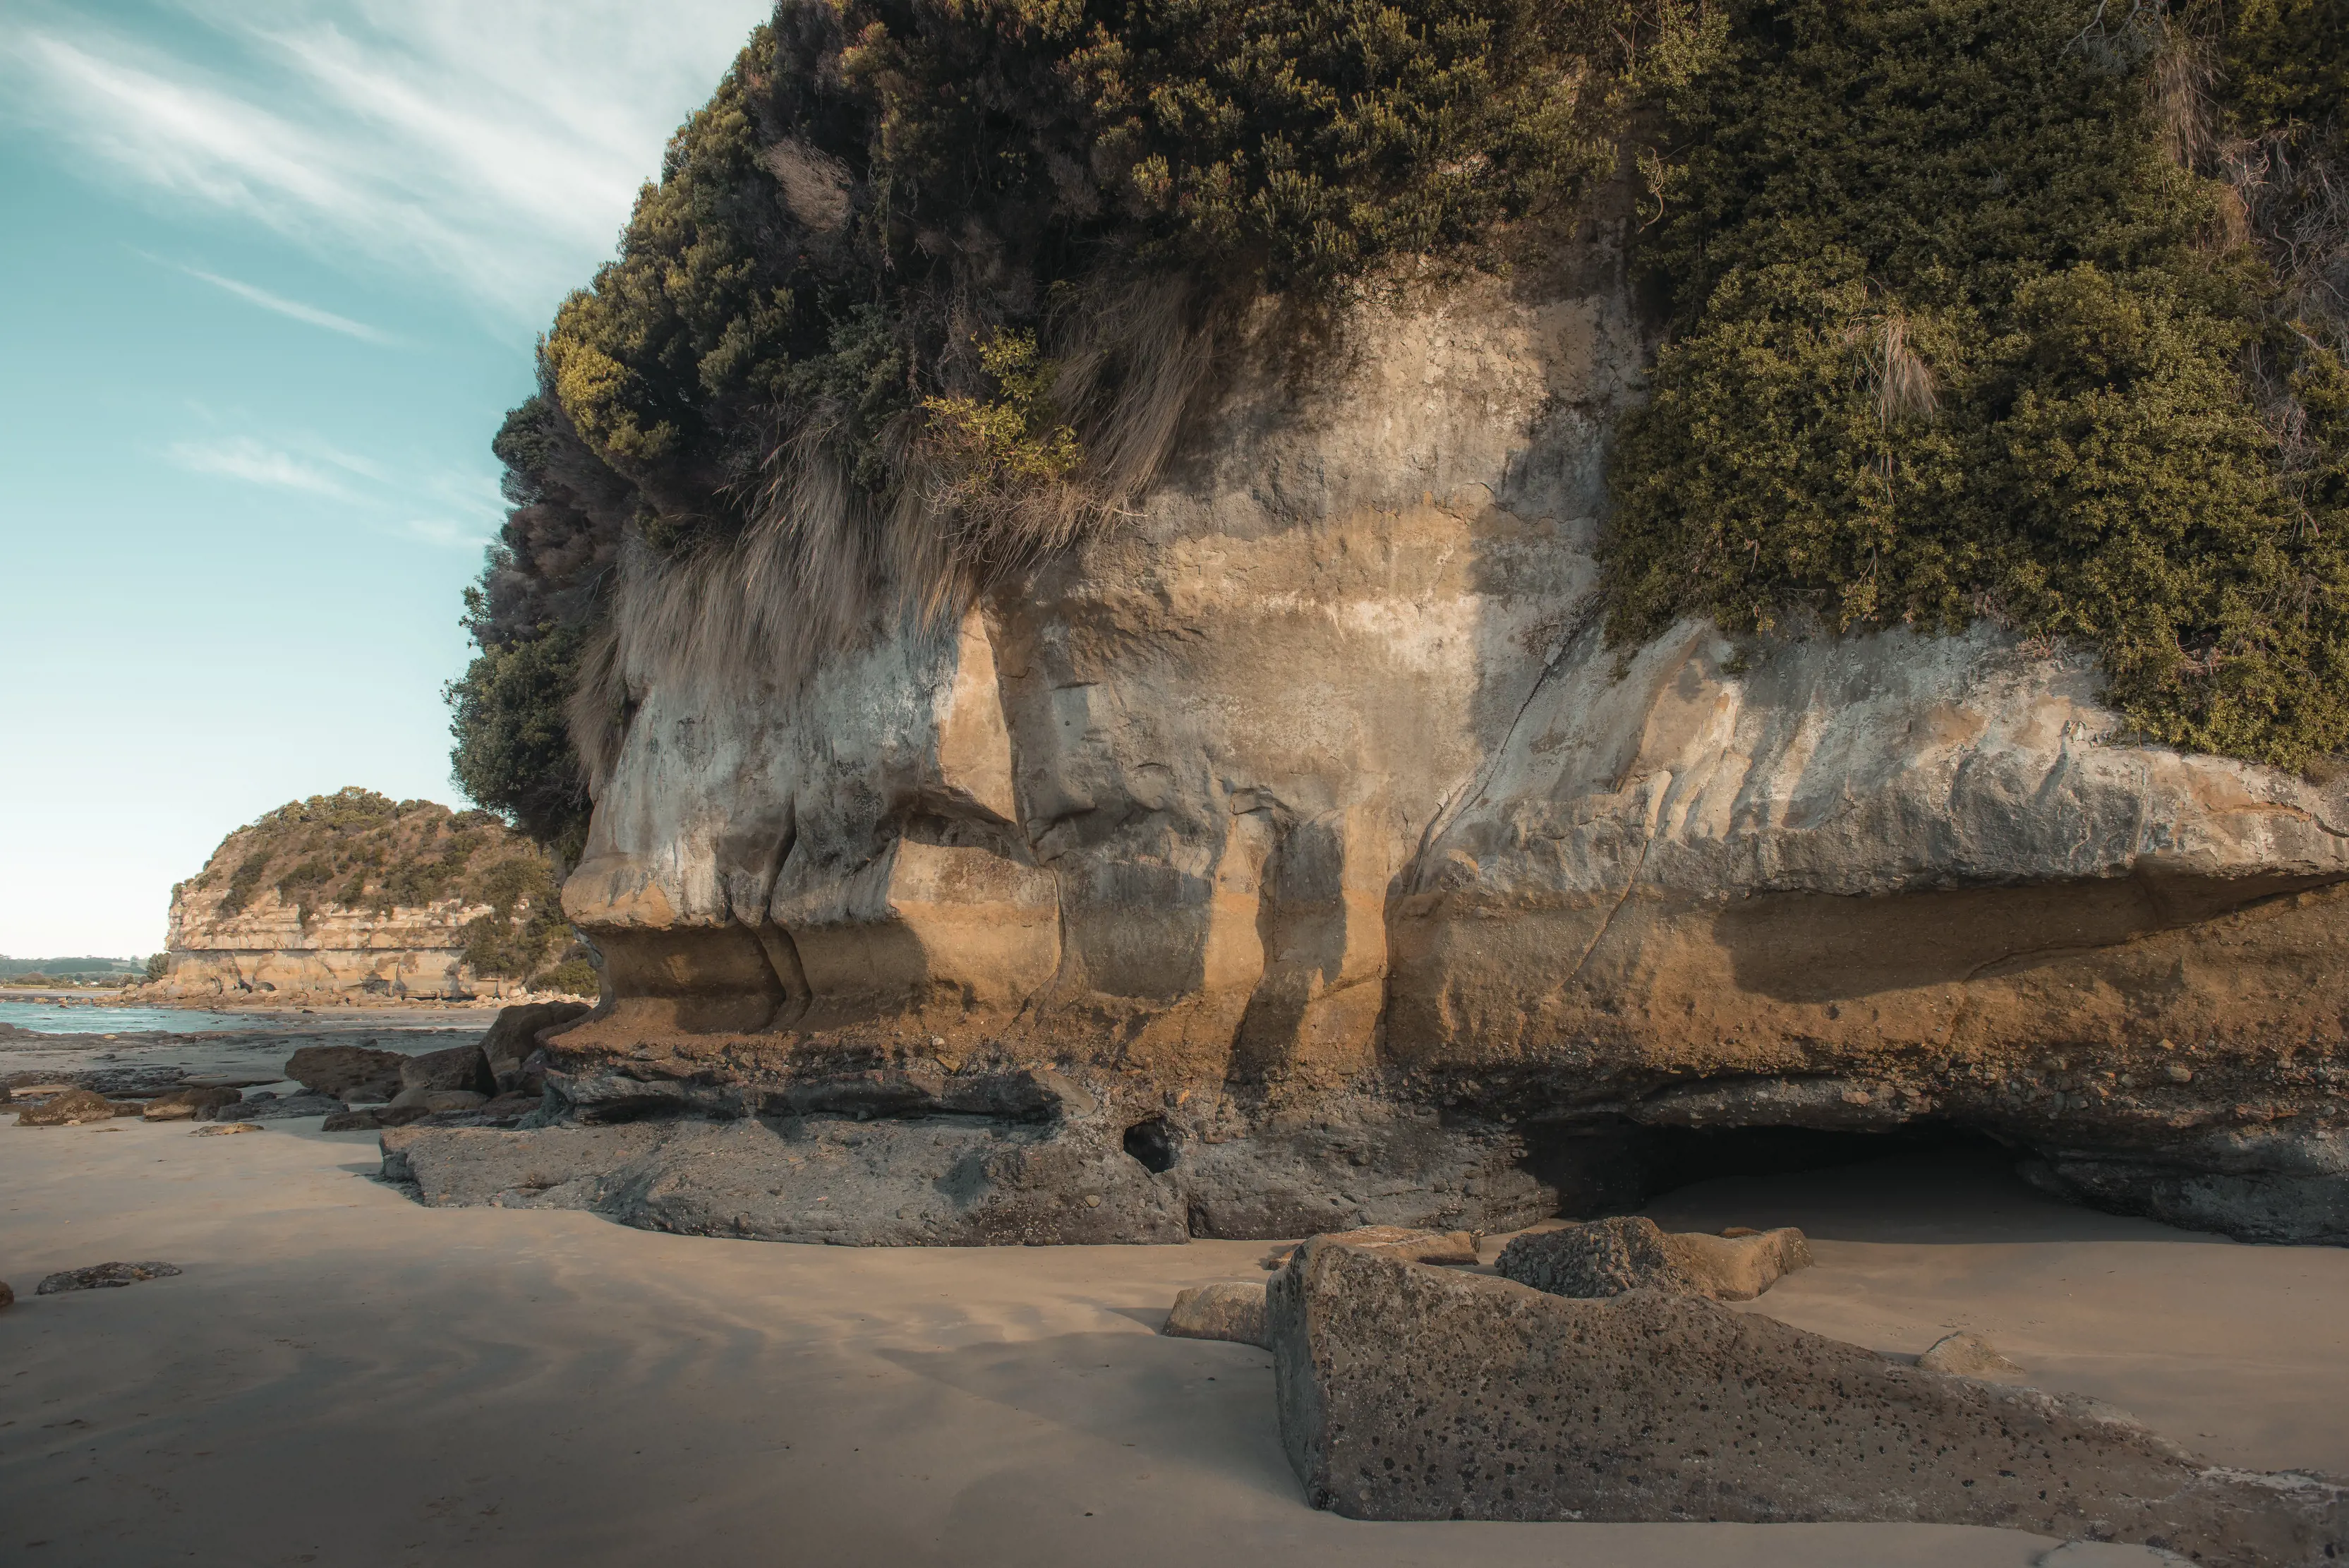 Fossil Bluff is a sandstone bluff with layers of fossils embedded in the sandstone.